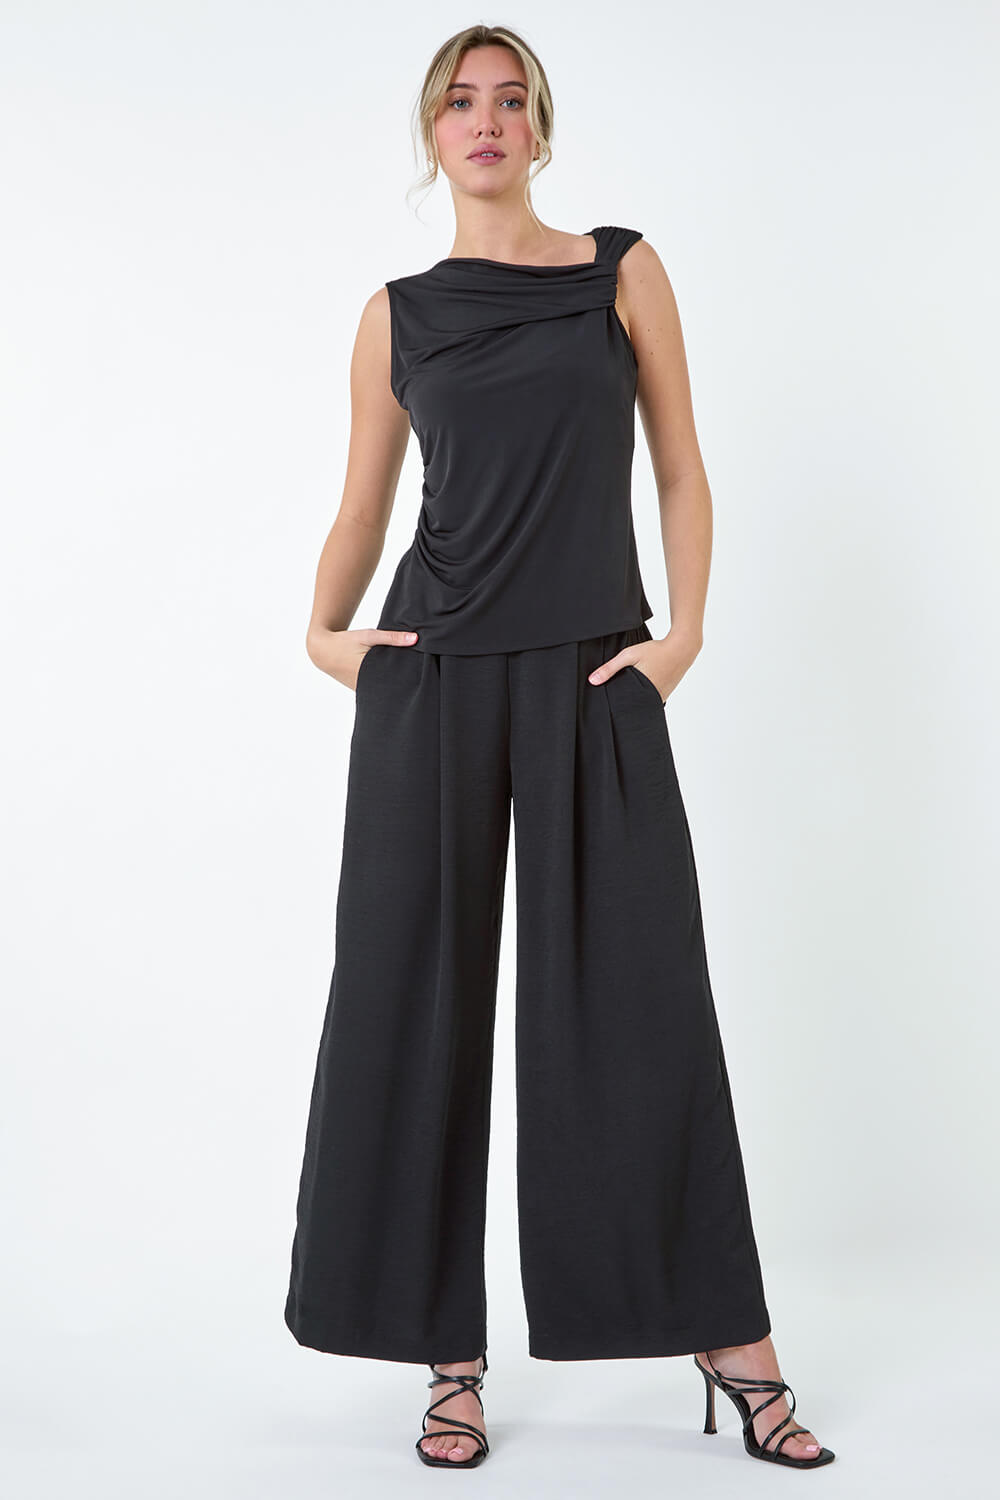 Black Ruched Twist Cowl Neck Stretch Top, Image 2 of 5